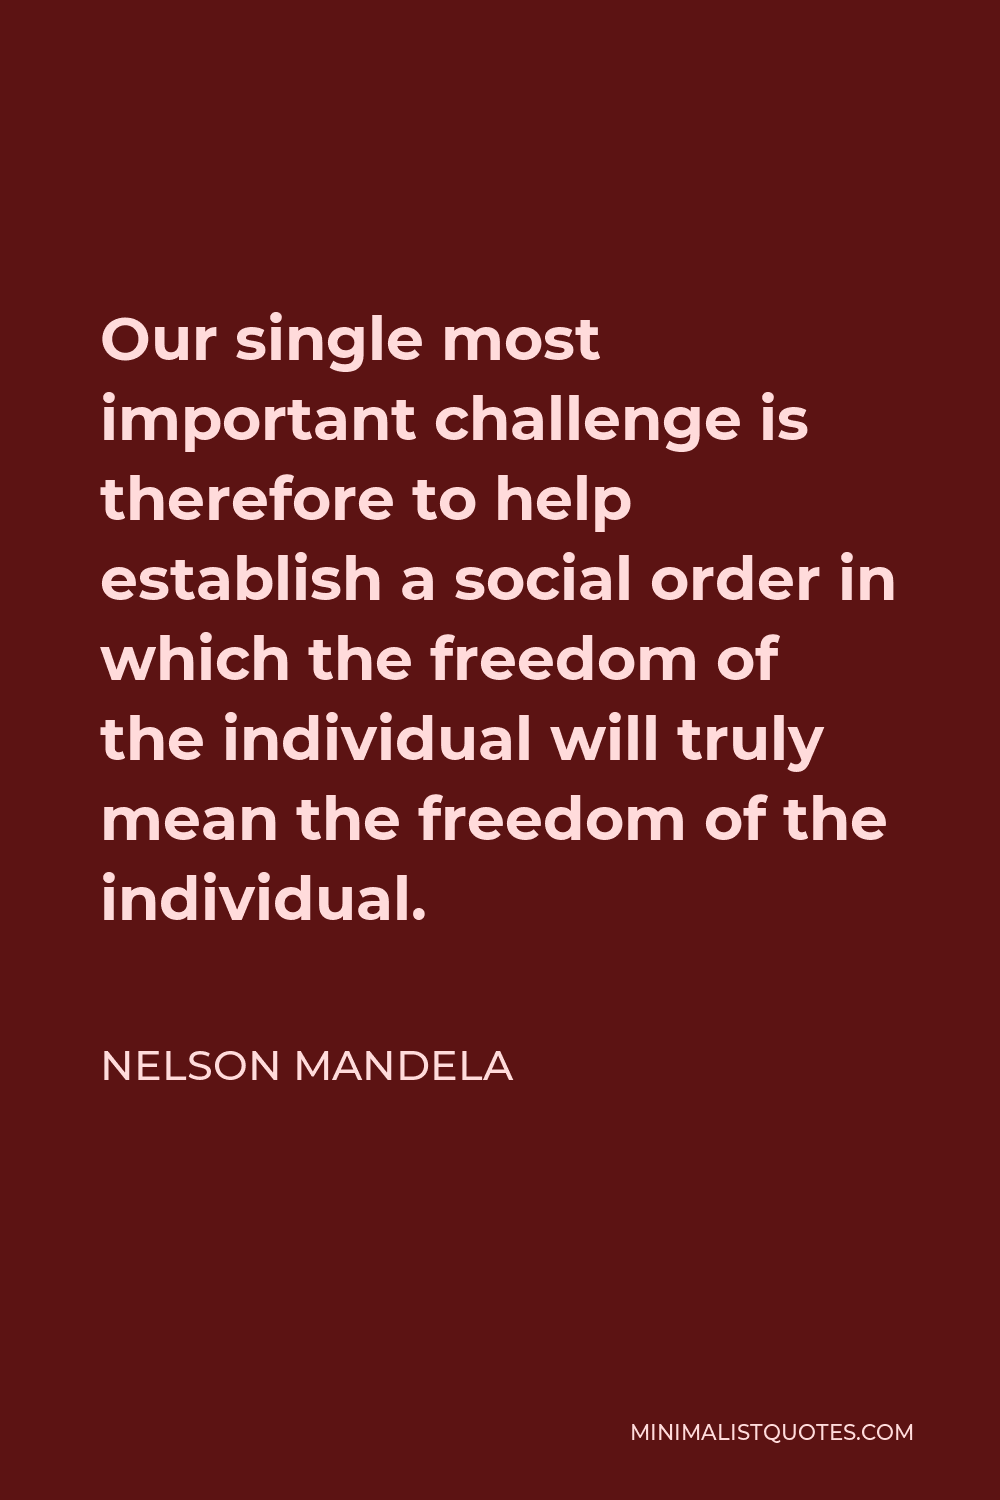 Nelson Mandela Quote - Our single most important challenge is therefore to help establish a social order in which the freedom of the individual will truly mean the freedom of the individual.